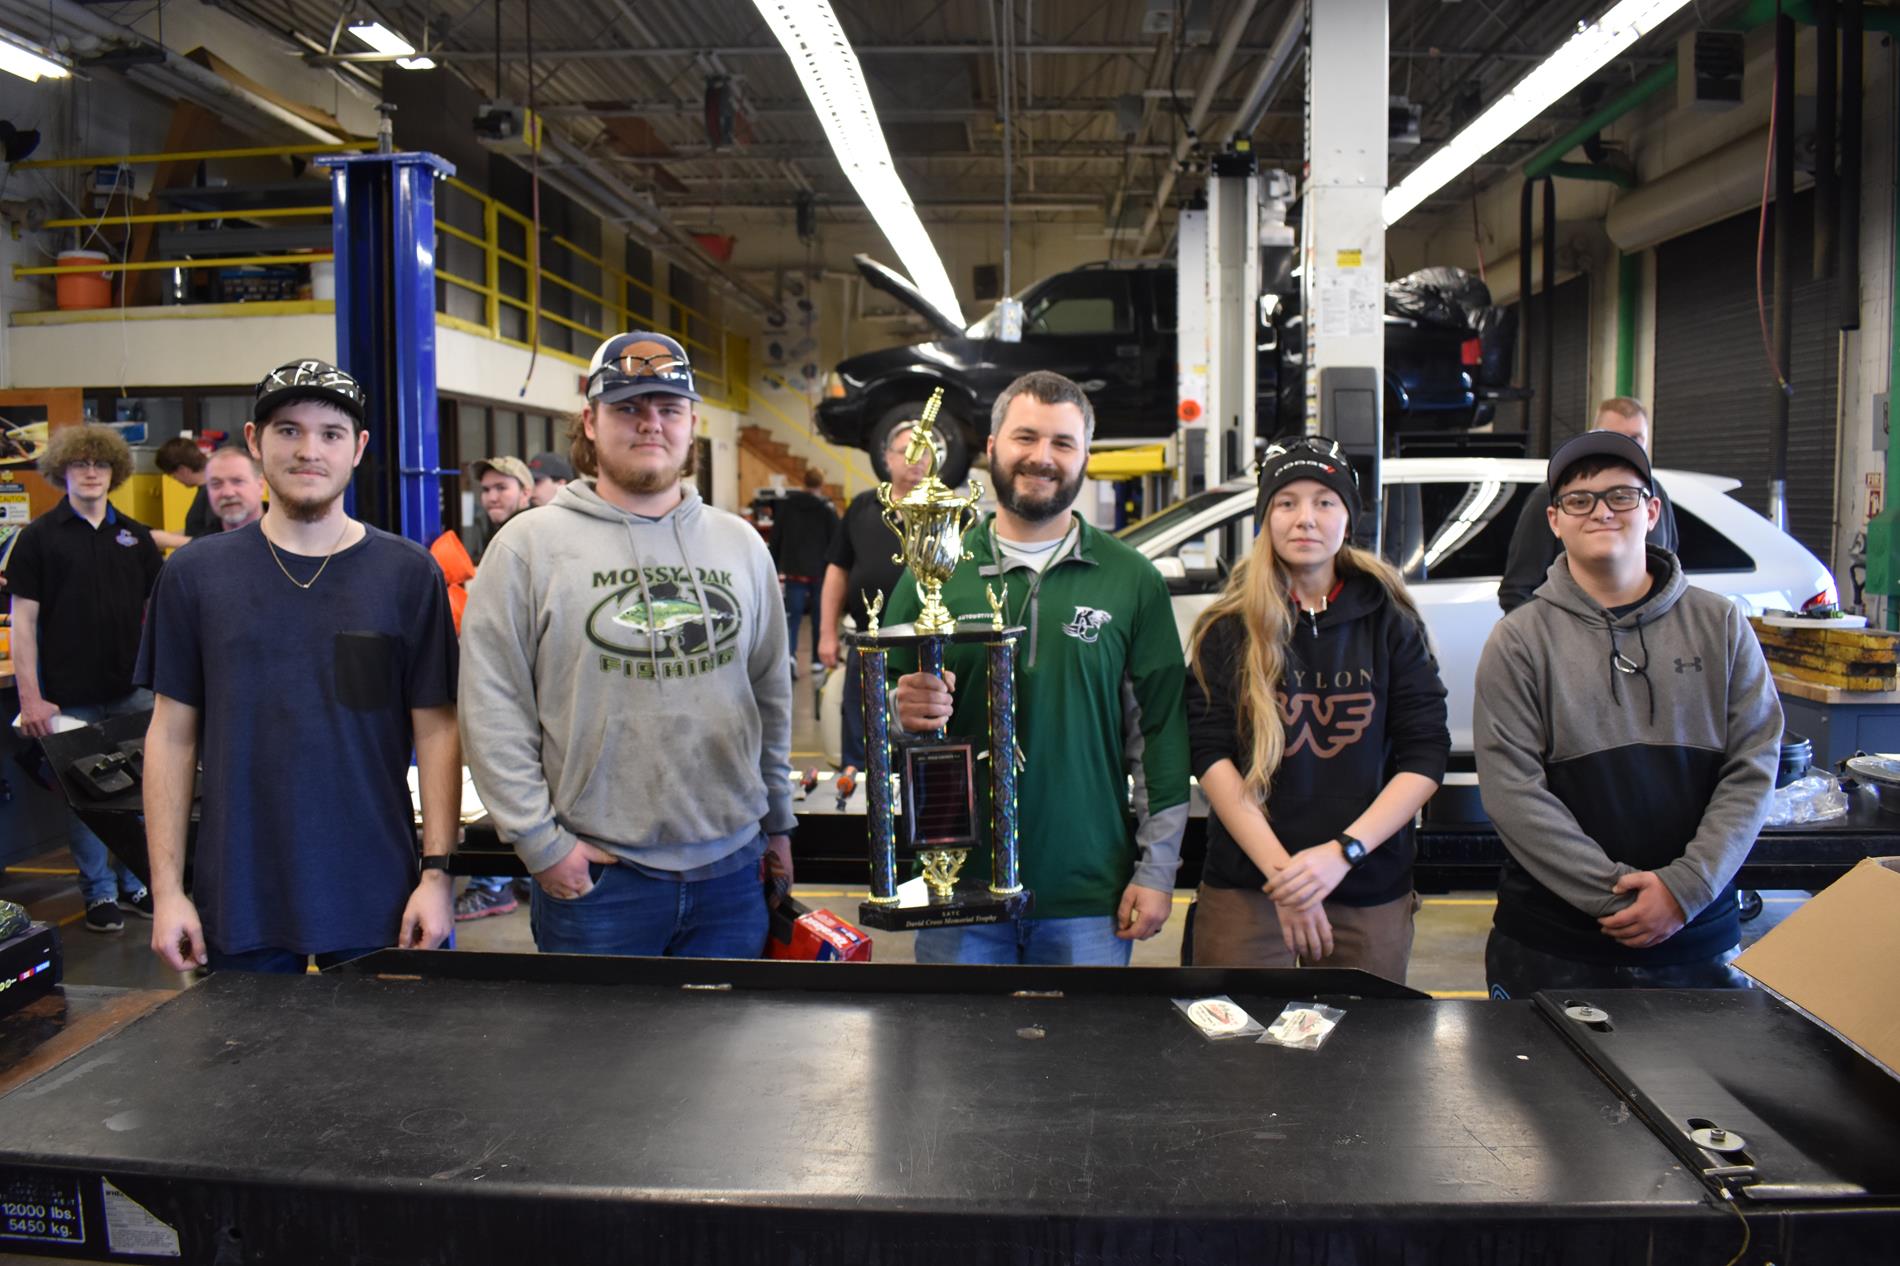 RCHS Automotive placed 1st in the STAC Automotive Competition!